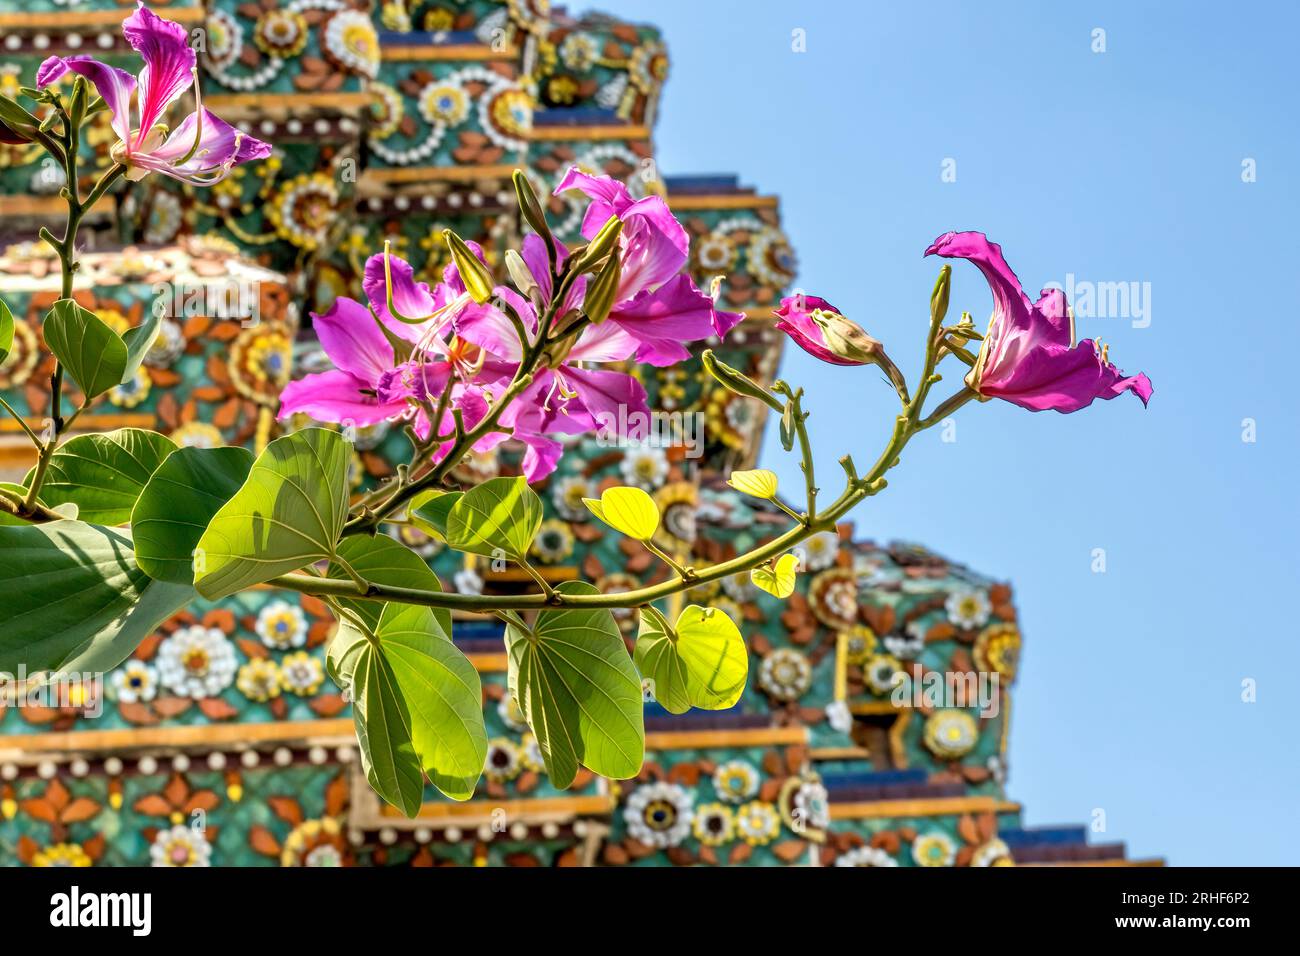 Coloful Pink Hong Kong Orchid Tree Bauhinia Blakeana Flowers Ceramic Pagoda Wat Pho Po Temple Complex Bangkok Thailand. Built in 1600s. One of oldest Stock Photo